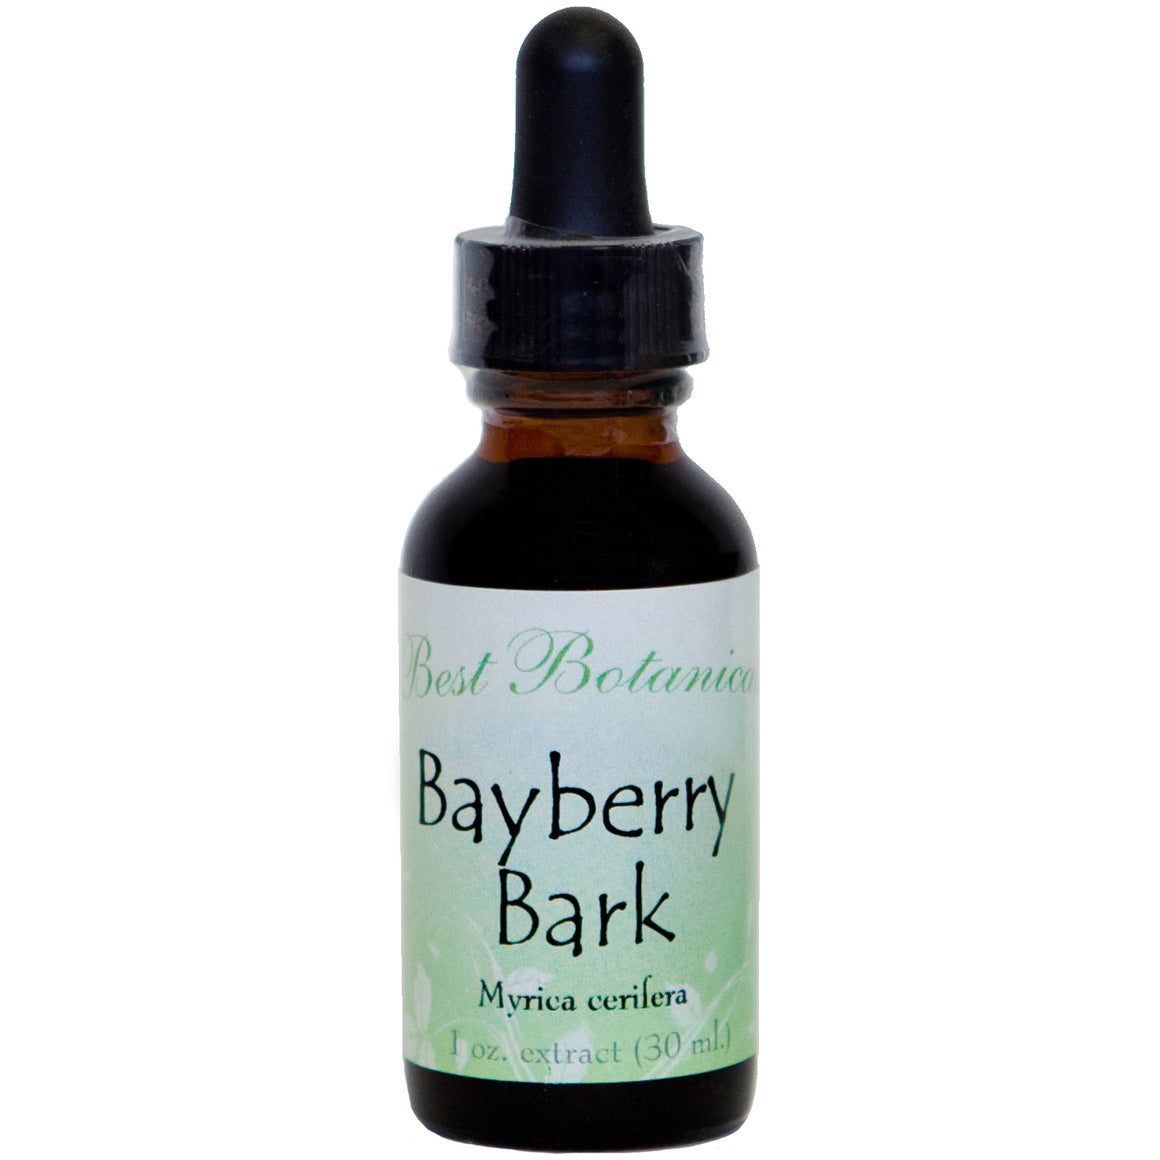 Bayberry Root Bark Extract